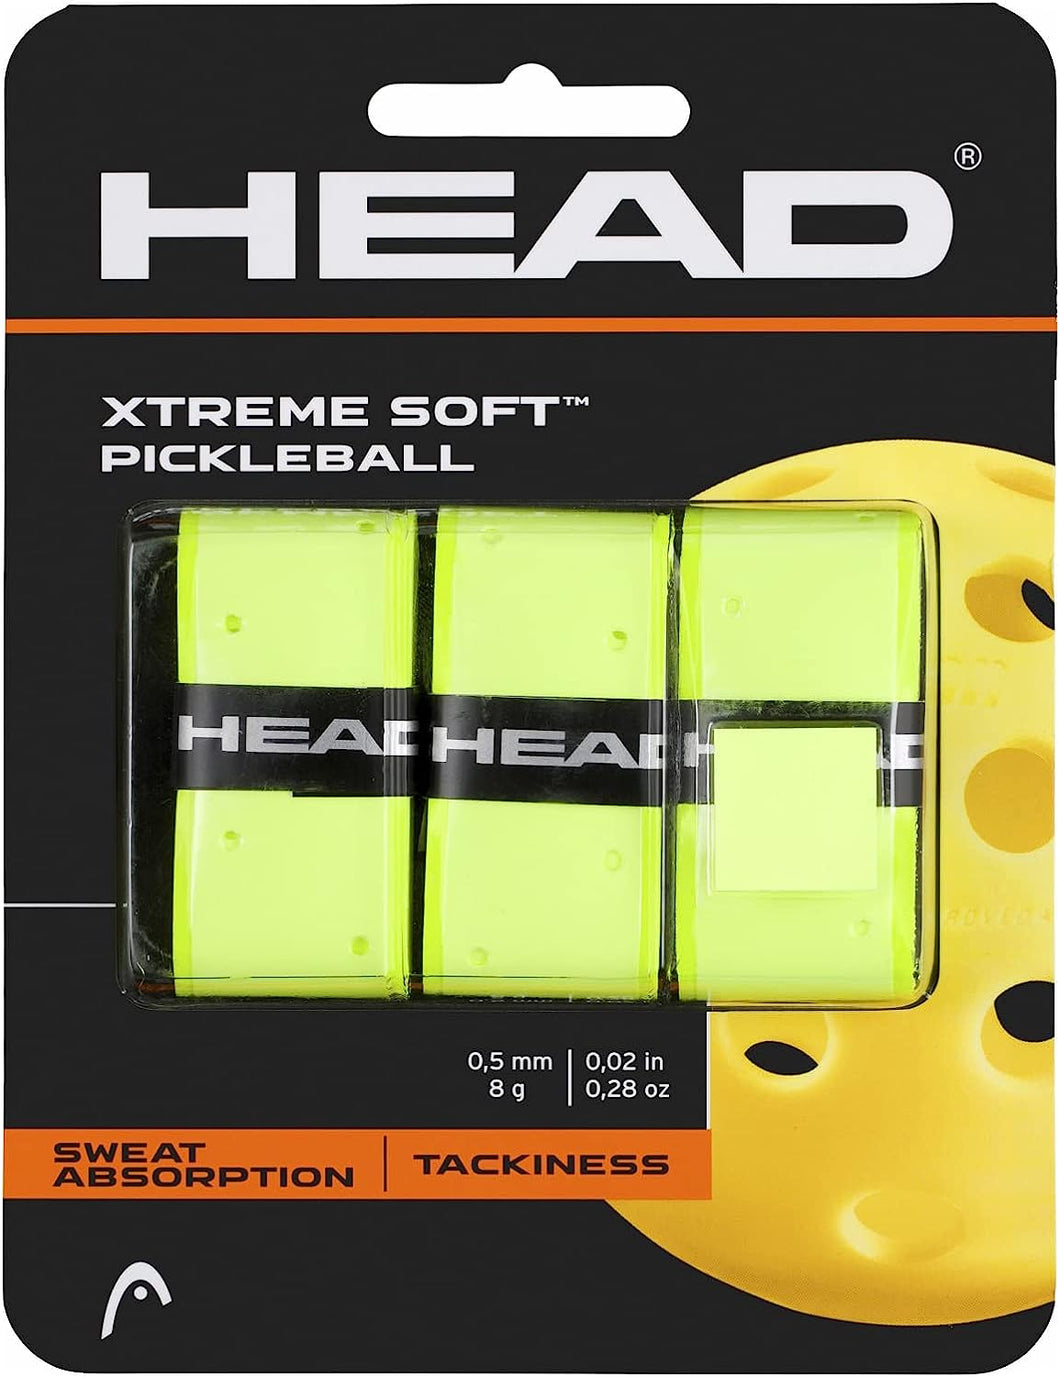 Thanks to a super tacky elastomer material and its extra large perforations, the XTREMESOFT overgrip provides additional feel and extremely good absorption. It also comes in a variety of colors so you can add even more color to your paddle and game.